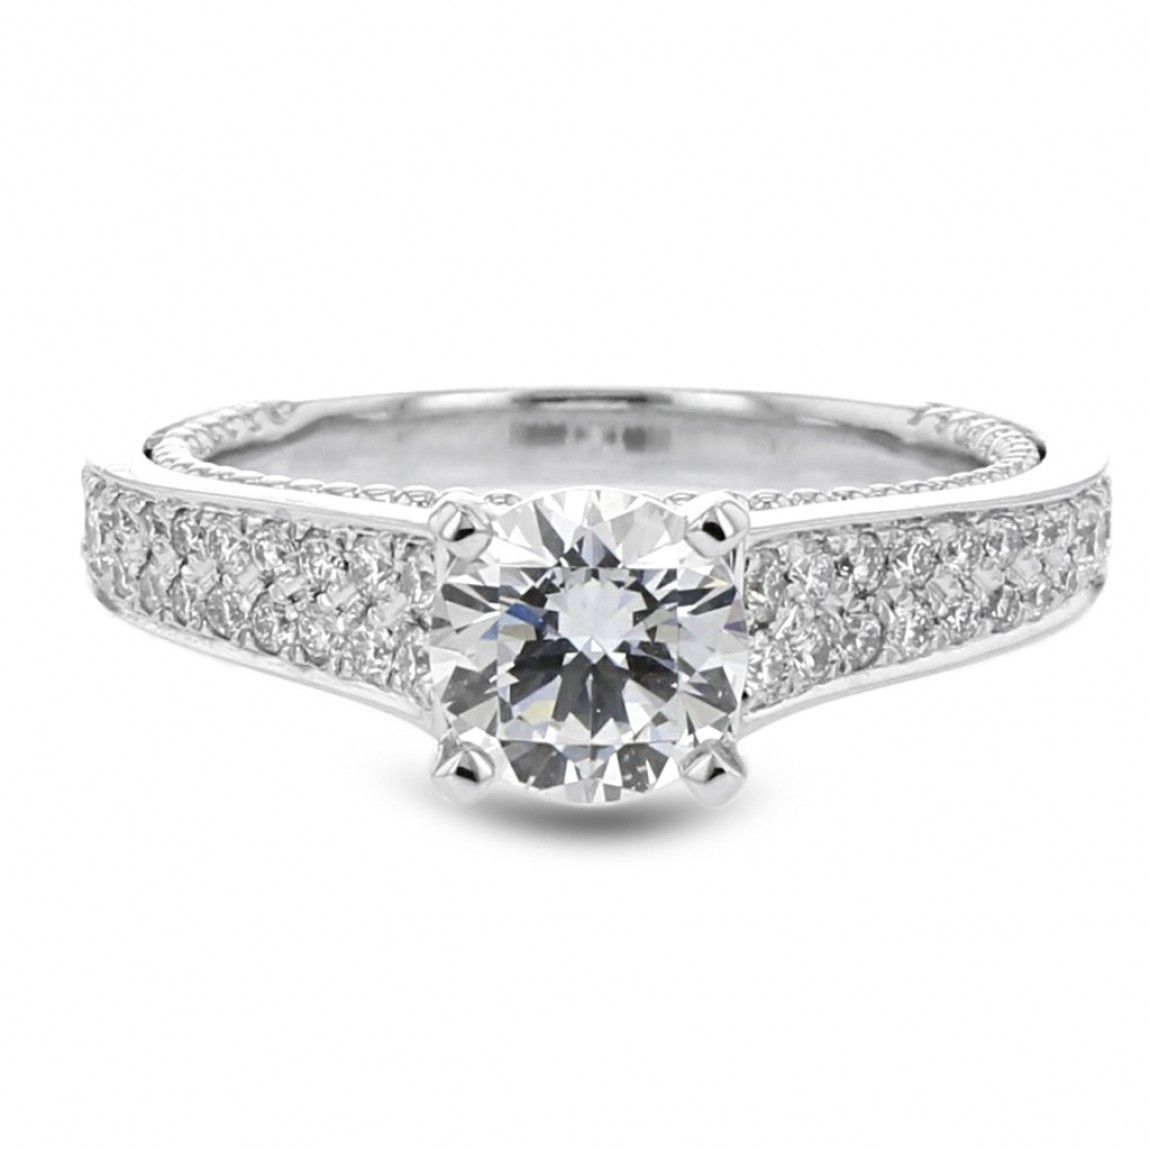 Diamond Engagement Ring Setting, Cathedral Semi Mount, Pave Shoulders,  Hidden Milgrain Ring, 14k White Gold,  (View 16 of 25)